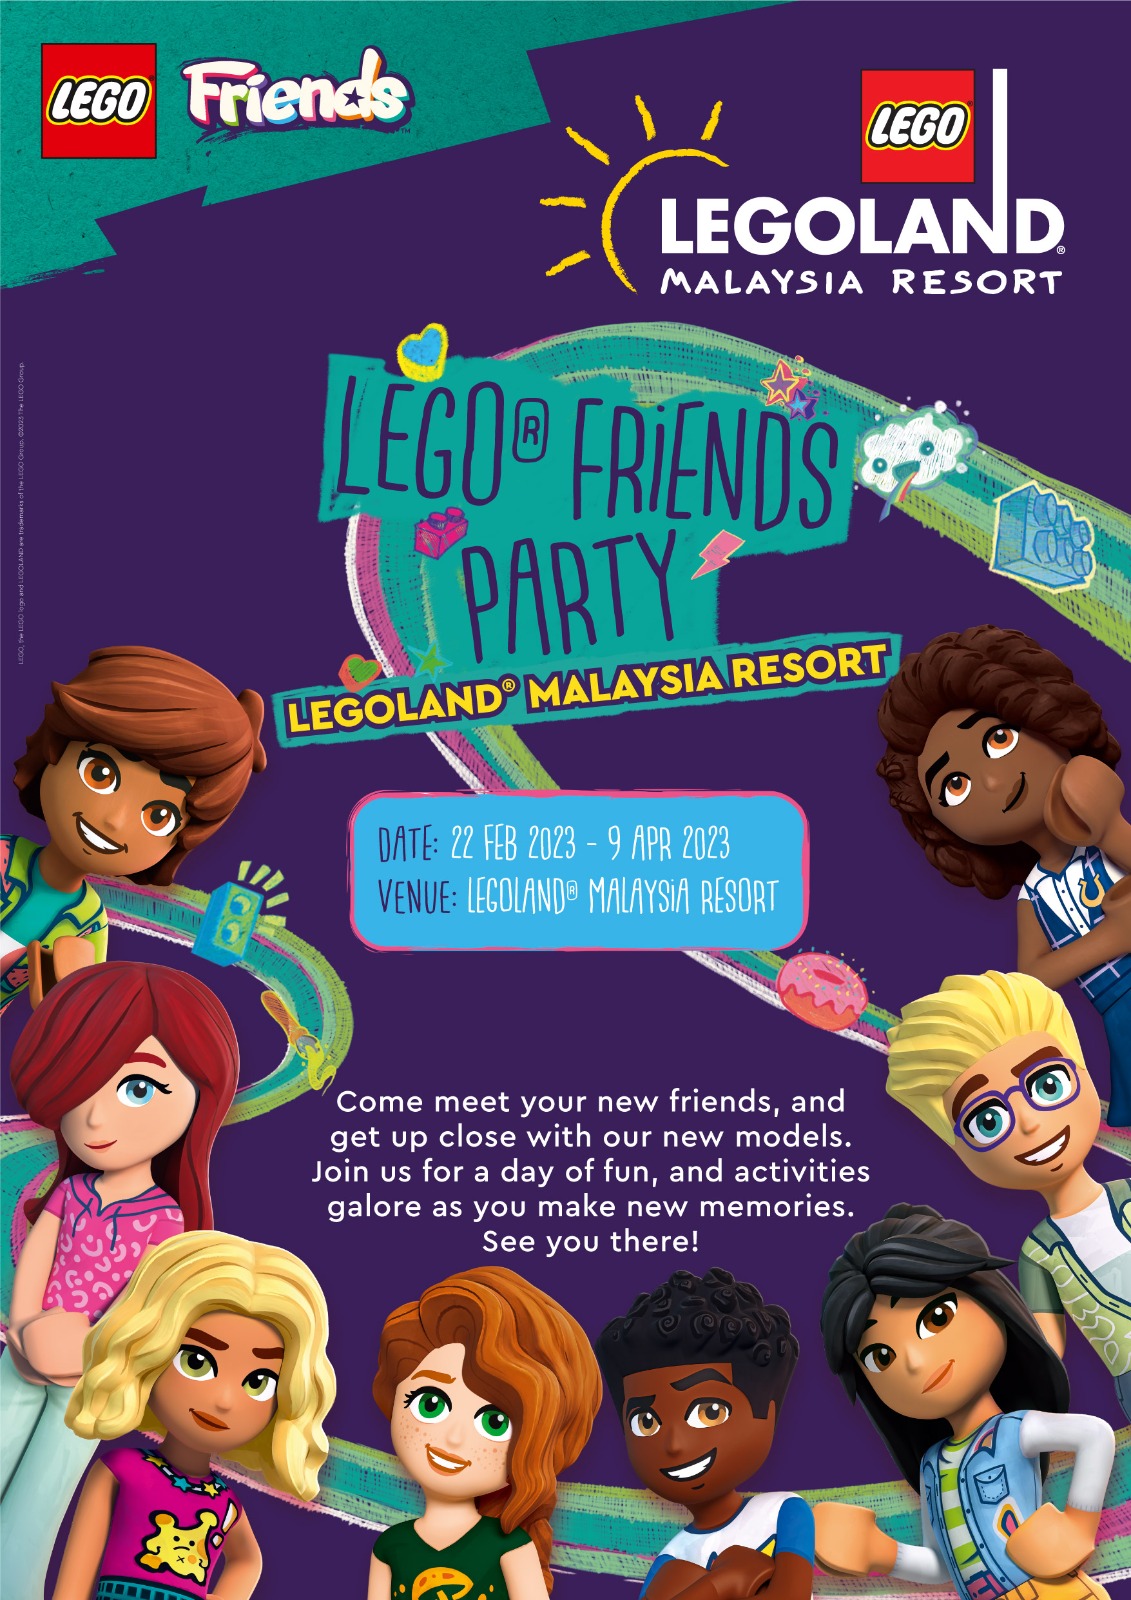 LEGOLAND® Malaysia Resort Celebrates Friendships With An Unforgettable LEGO® Friends Party